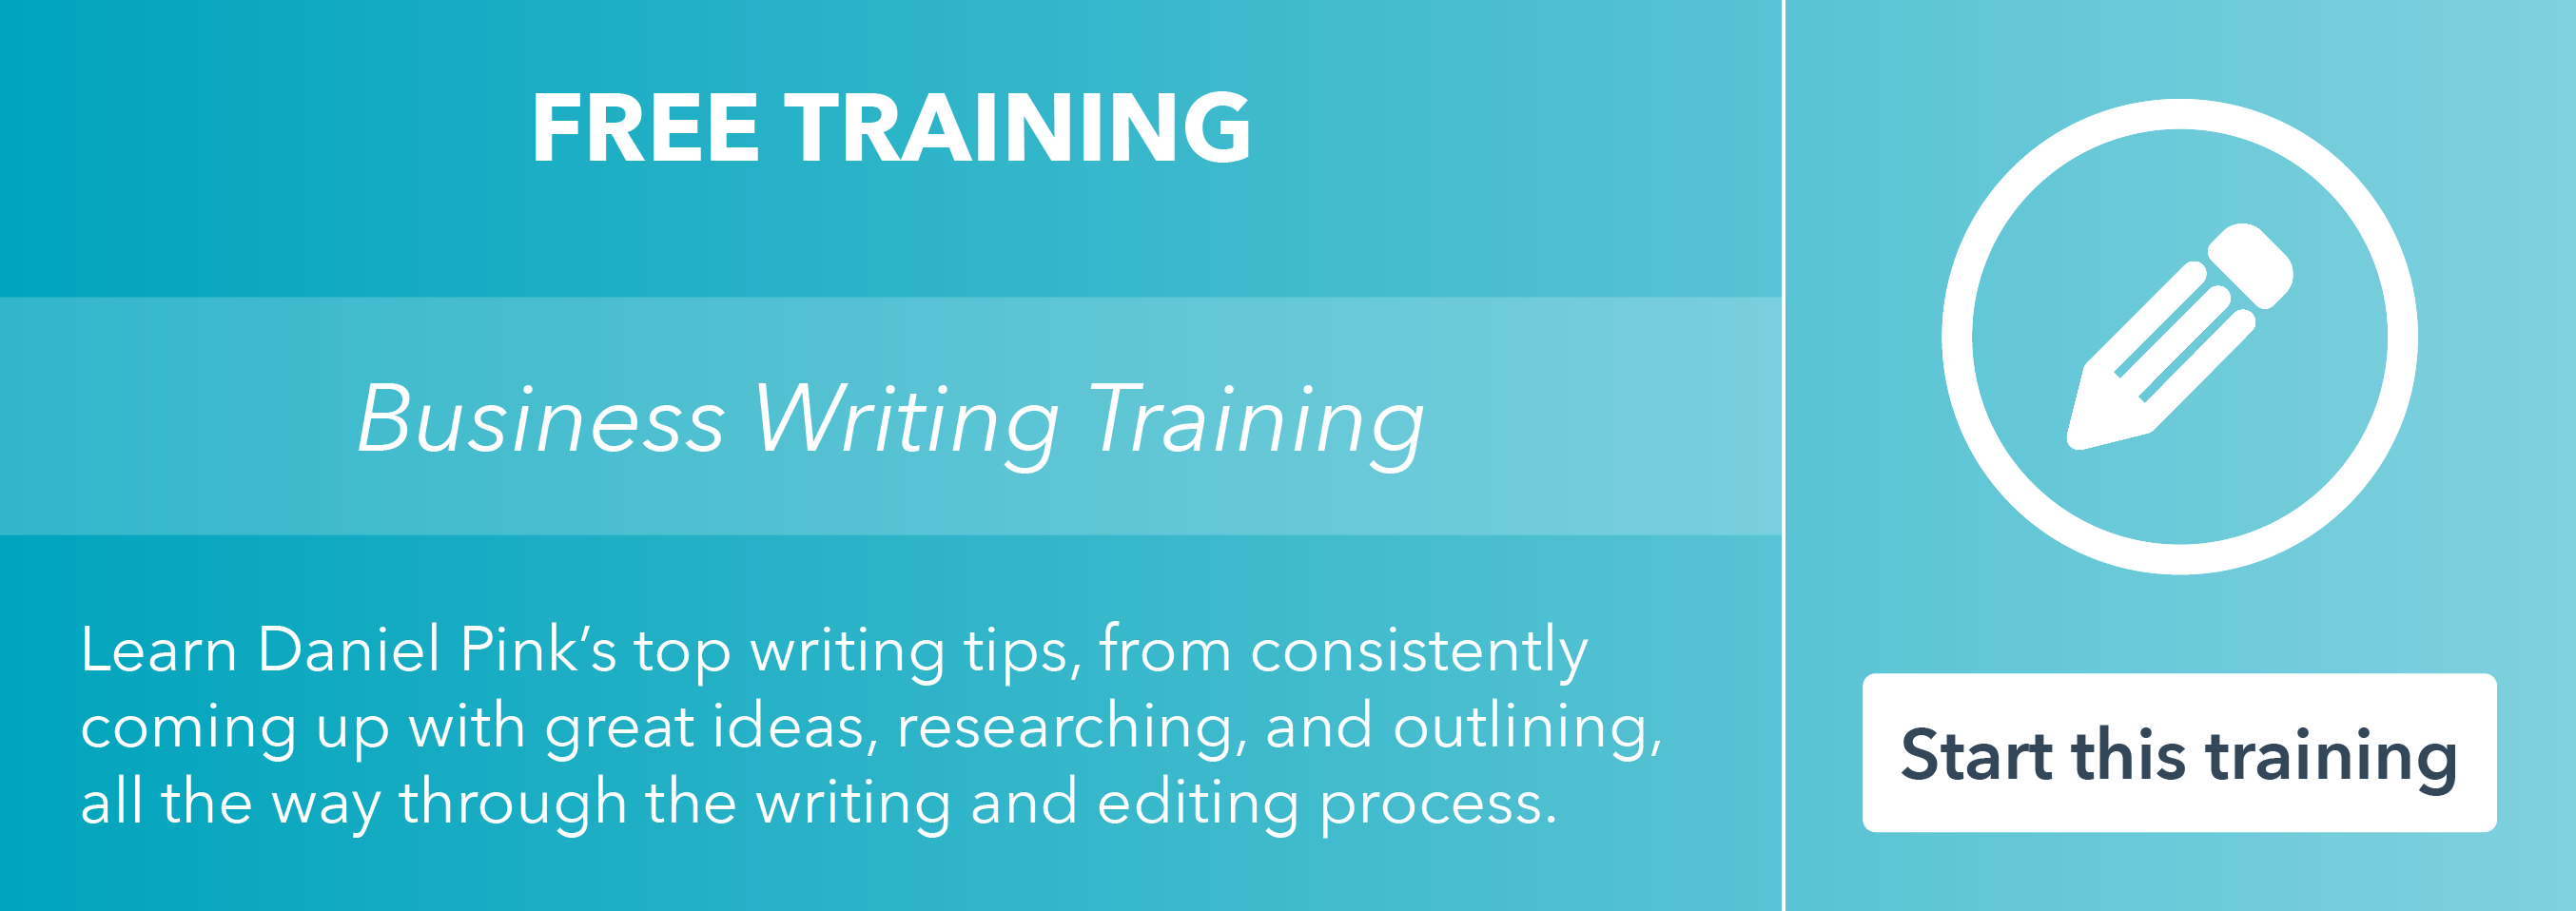 Take the free business writing training by HubSpot Academy